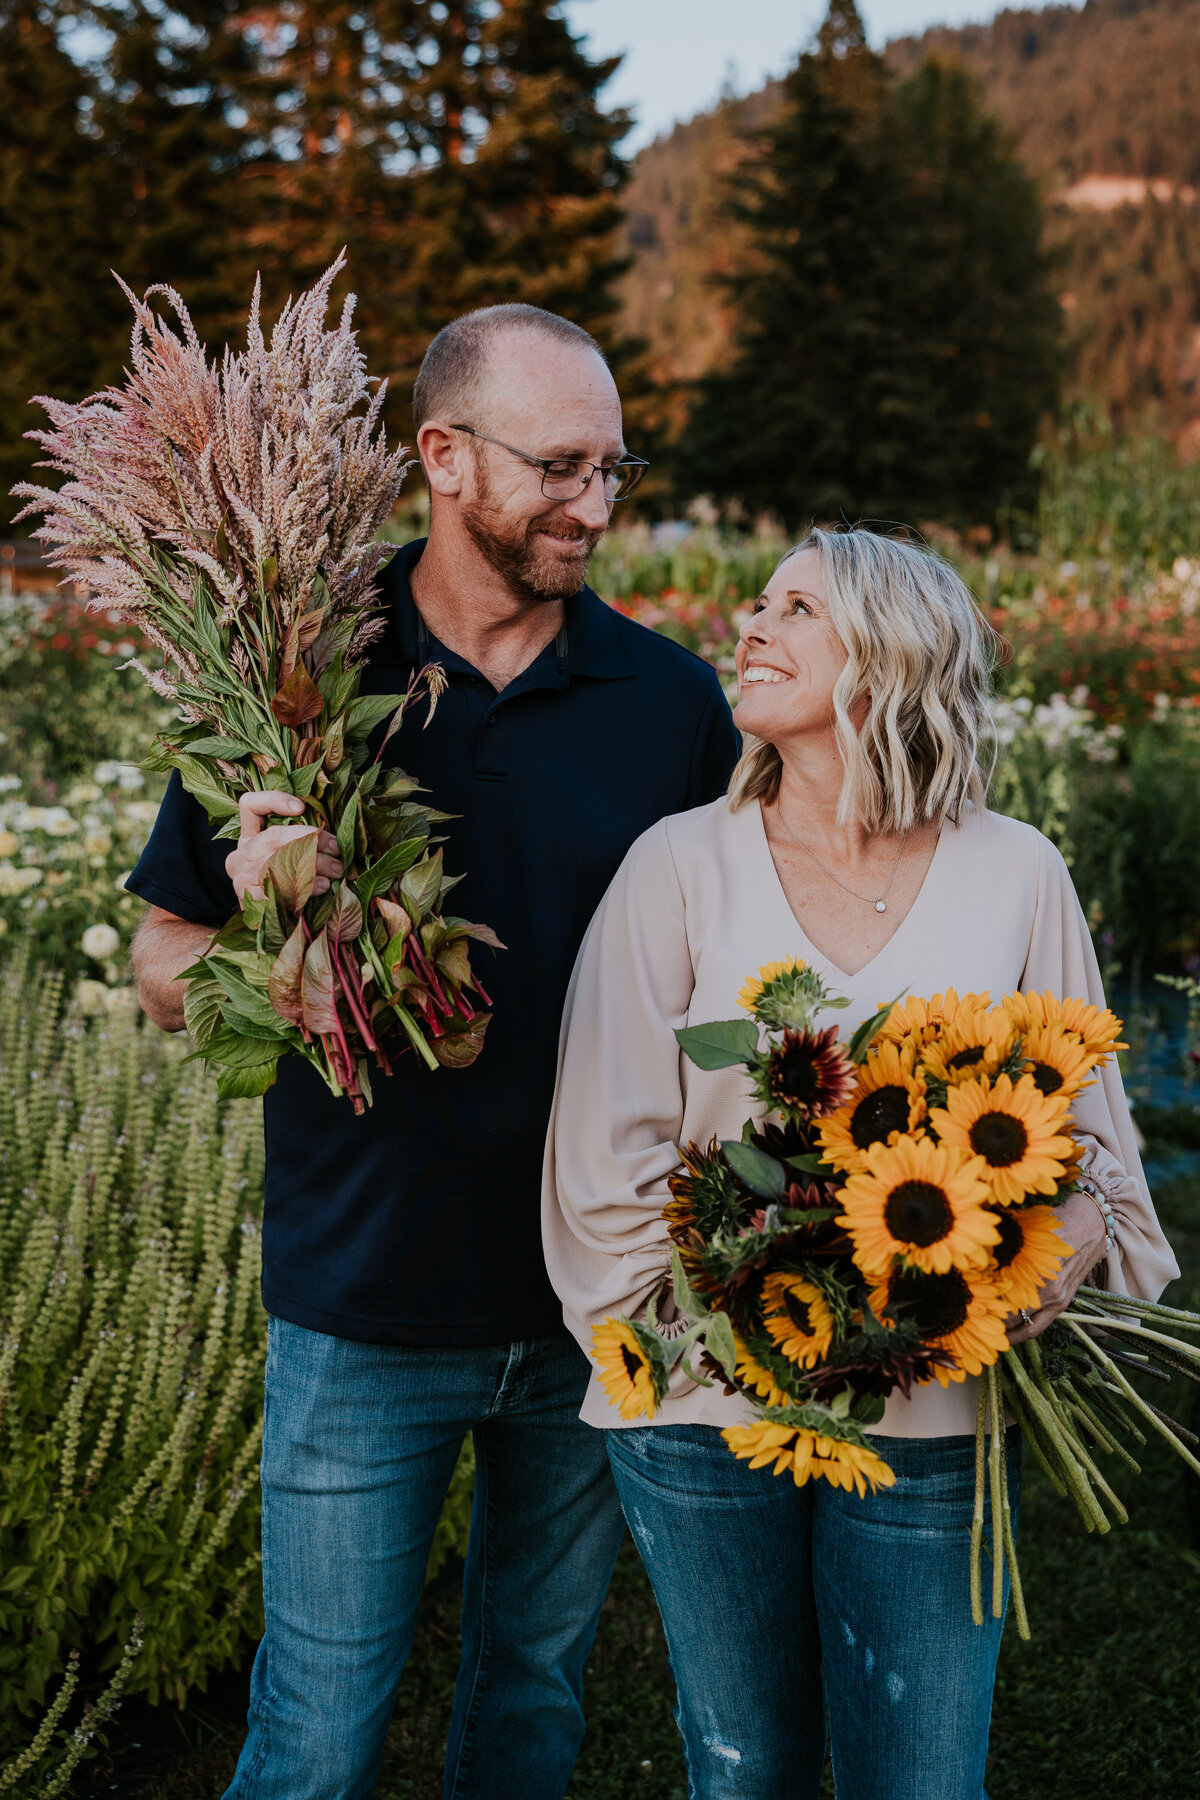 Couple smiles at each other while holding large bundles of flowers.